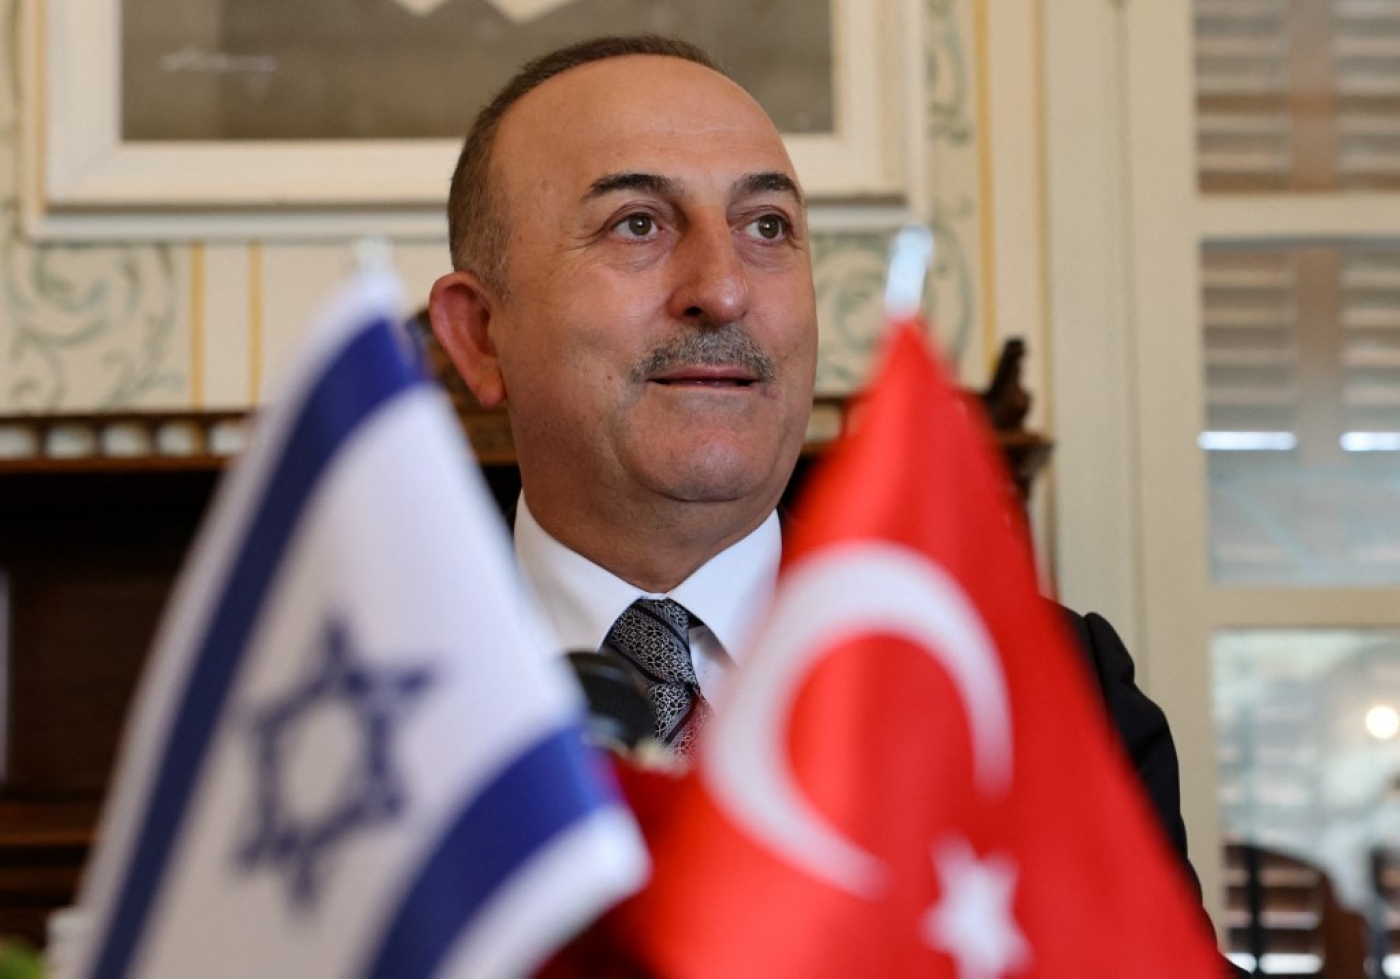 Turkish Foreign Minister Mevlut Cavusoglu gives an opening statement before meeting with Israeli and Turkish businessmen, in the coastral city of Tel Aviv, on May 25, 2022. (AFP)